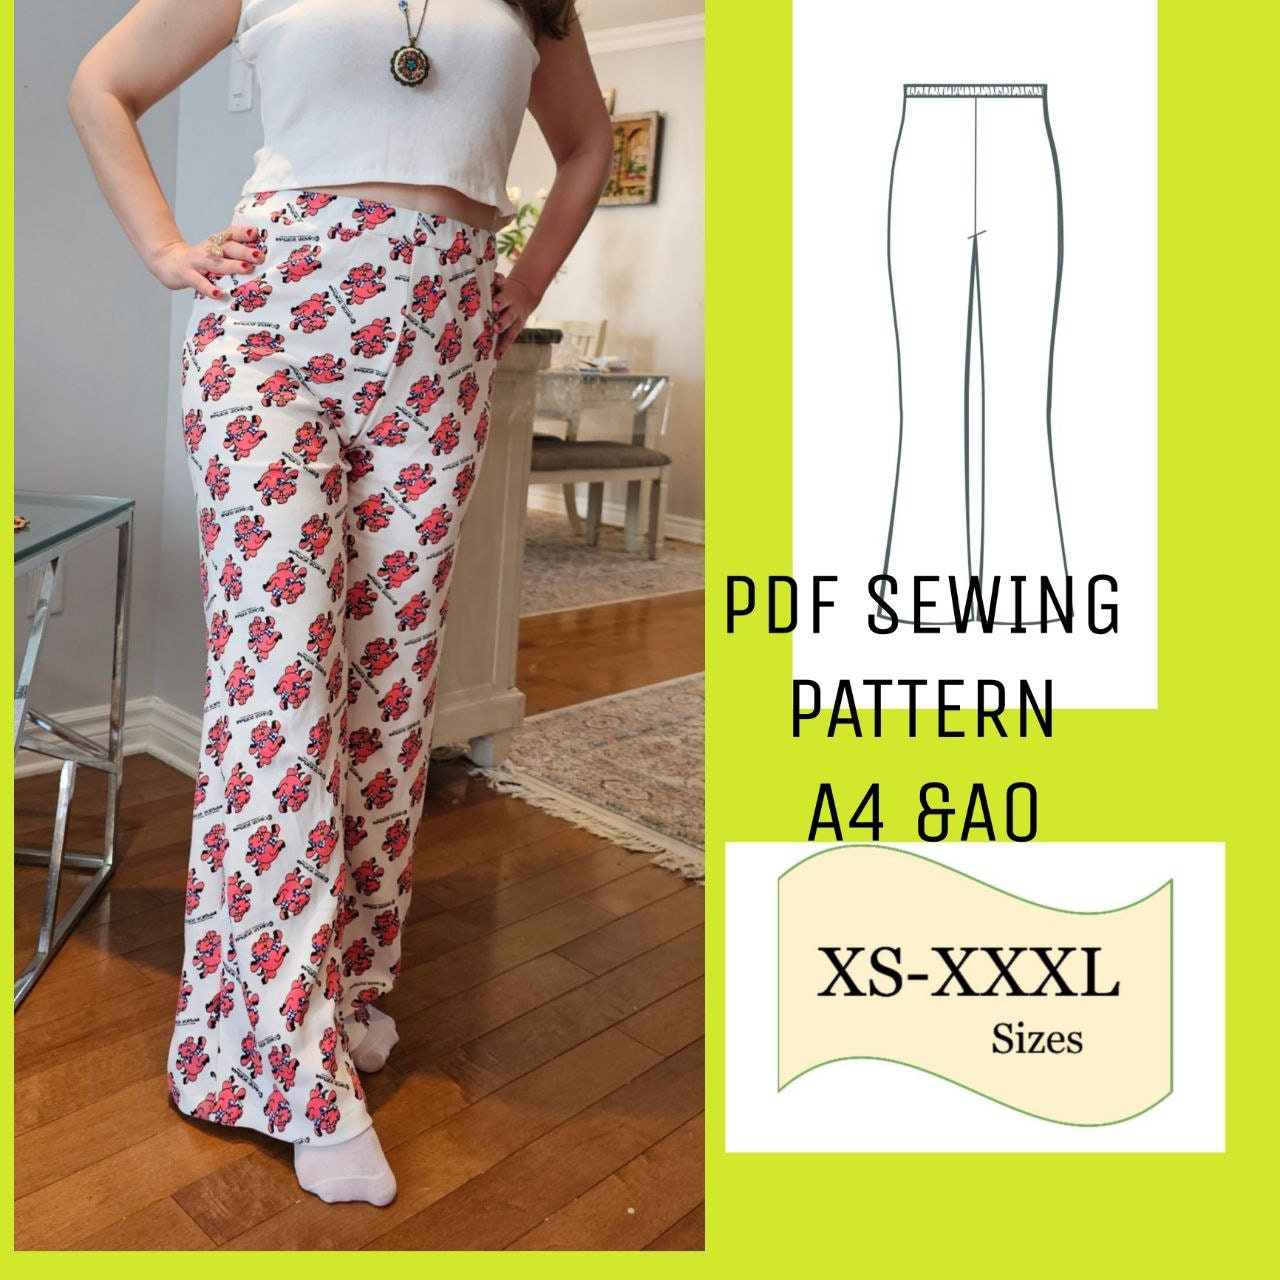 how to sew a seamless elastic waist band in pants - Yahoo Image